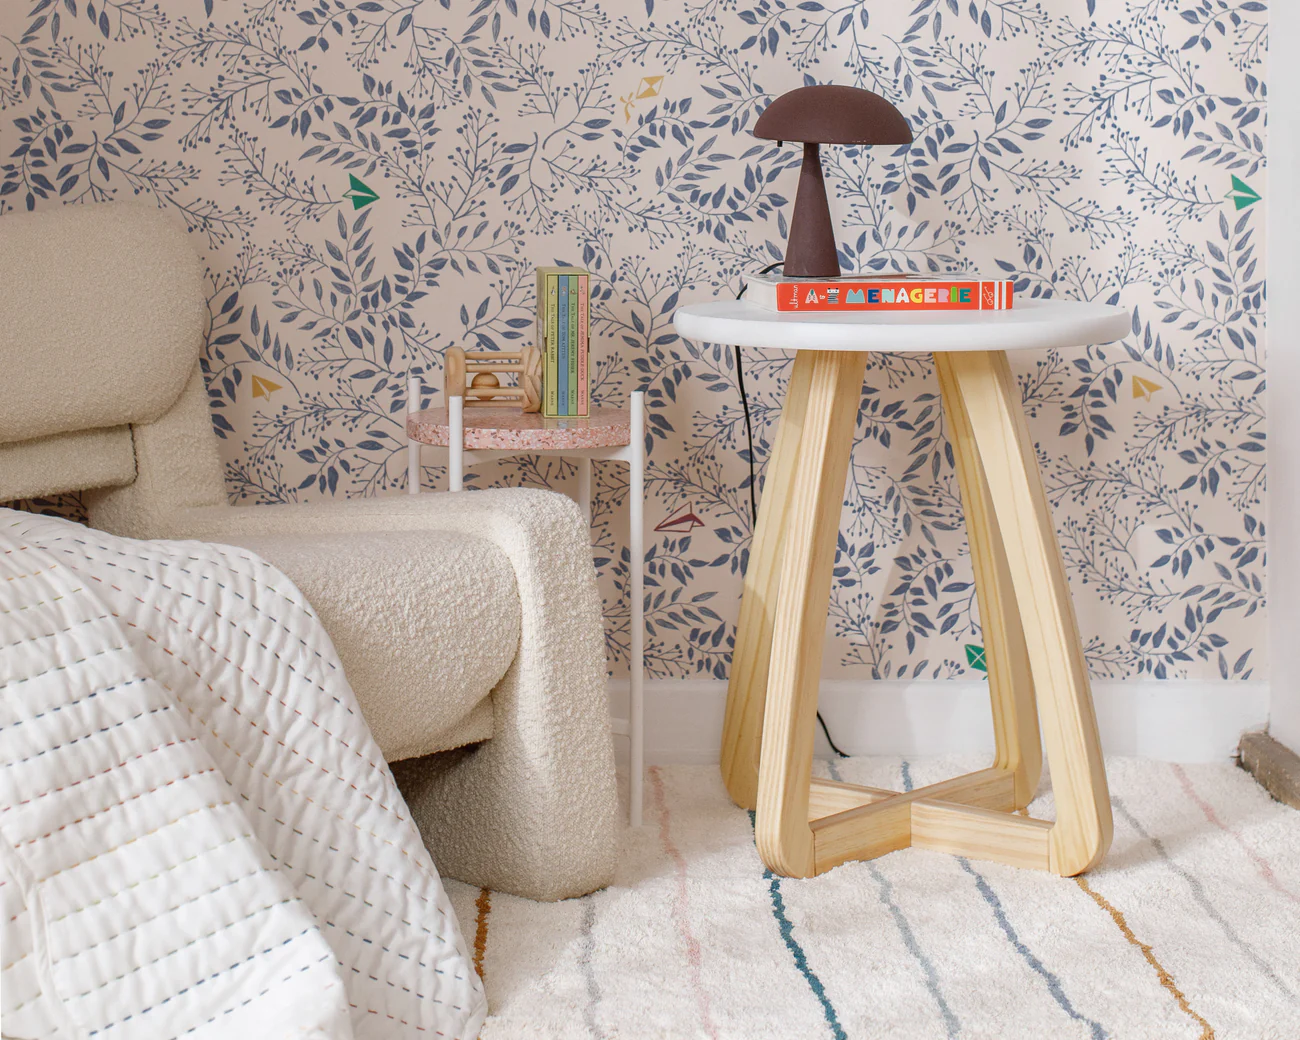 Nursery Essentials That Will Make the Space More Enjoyable for You, Too